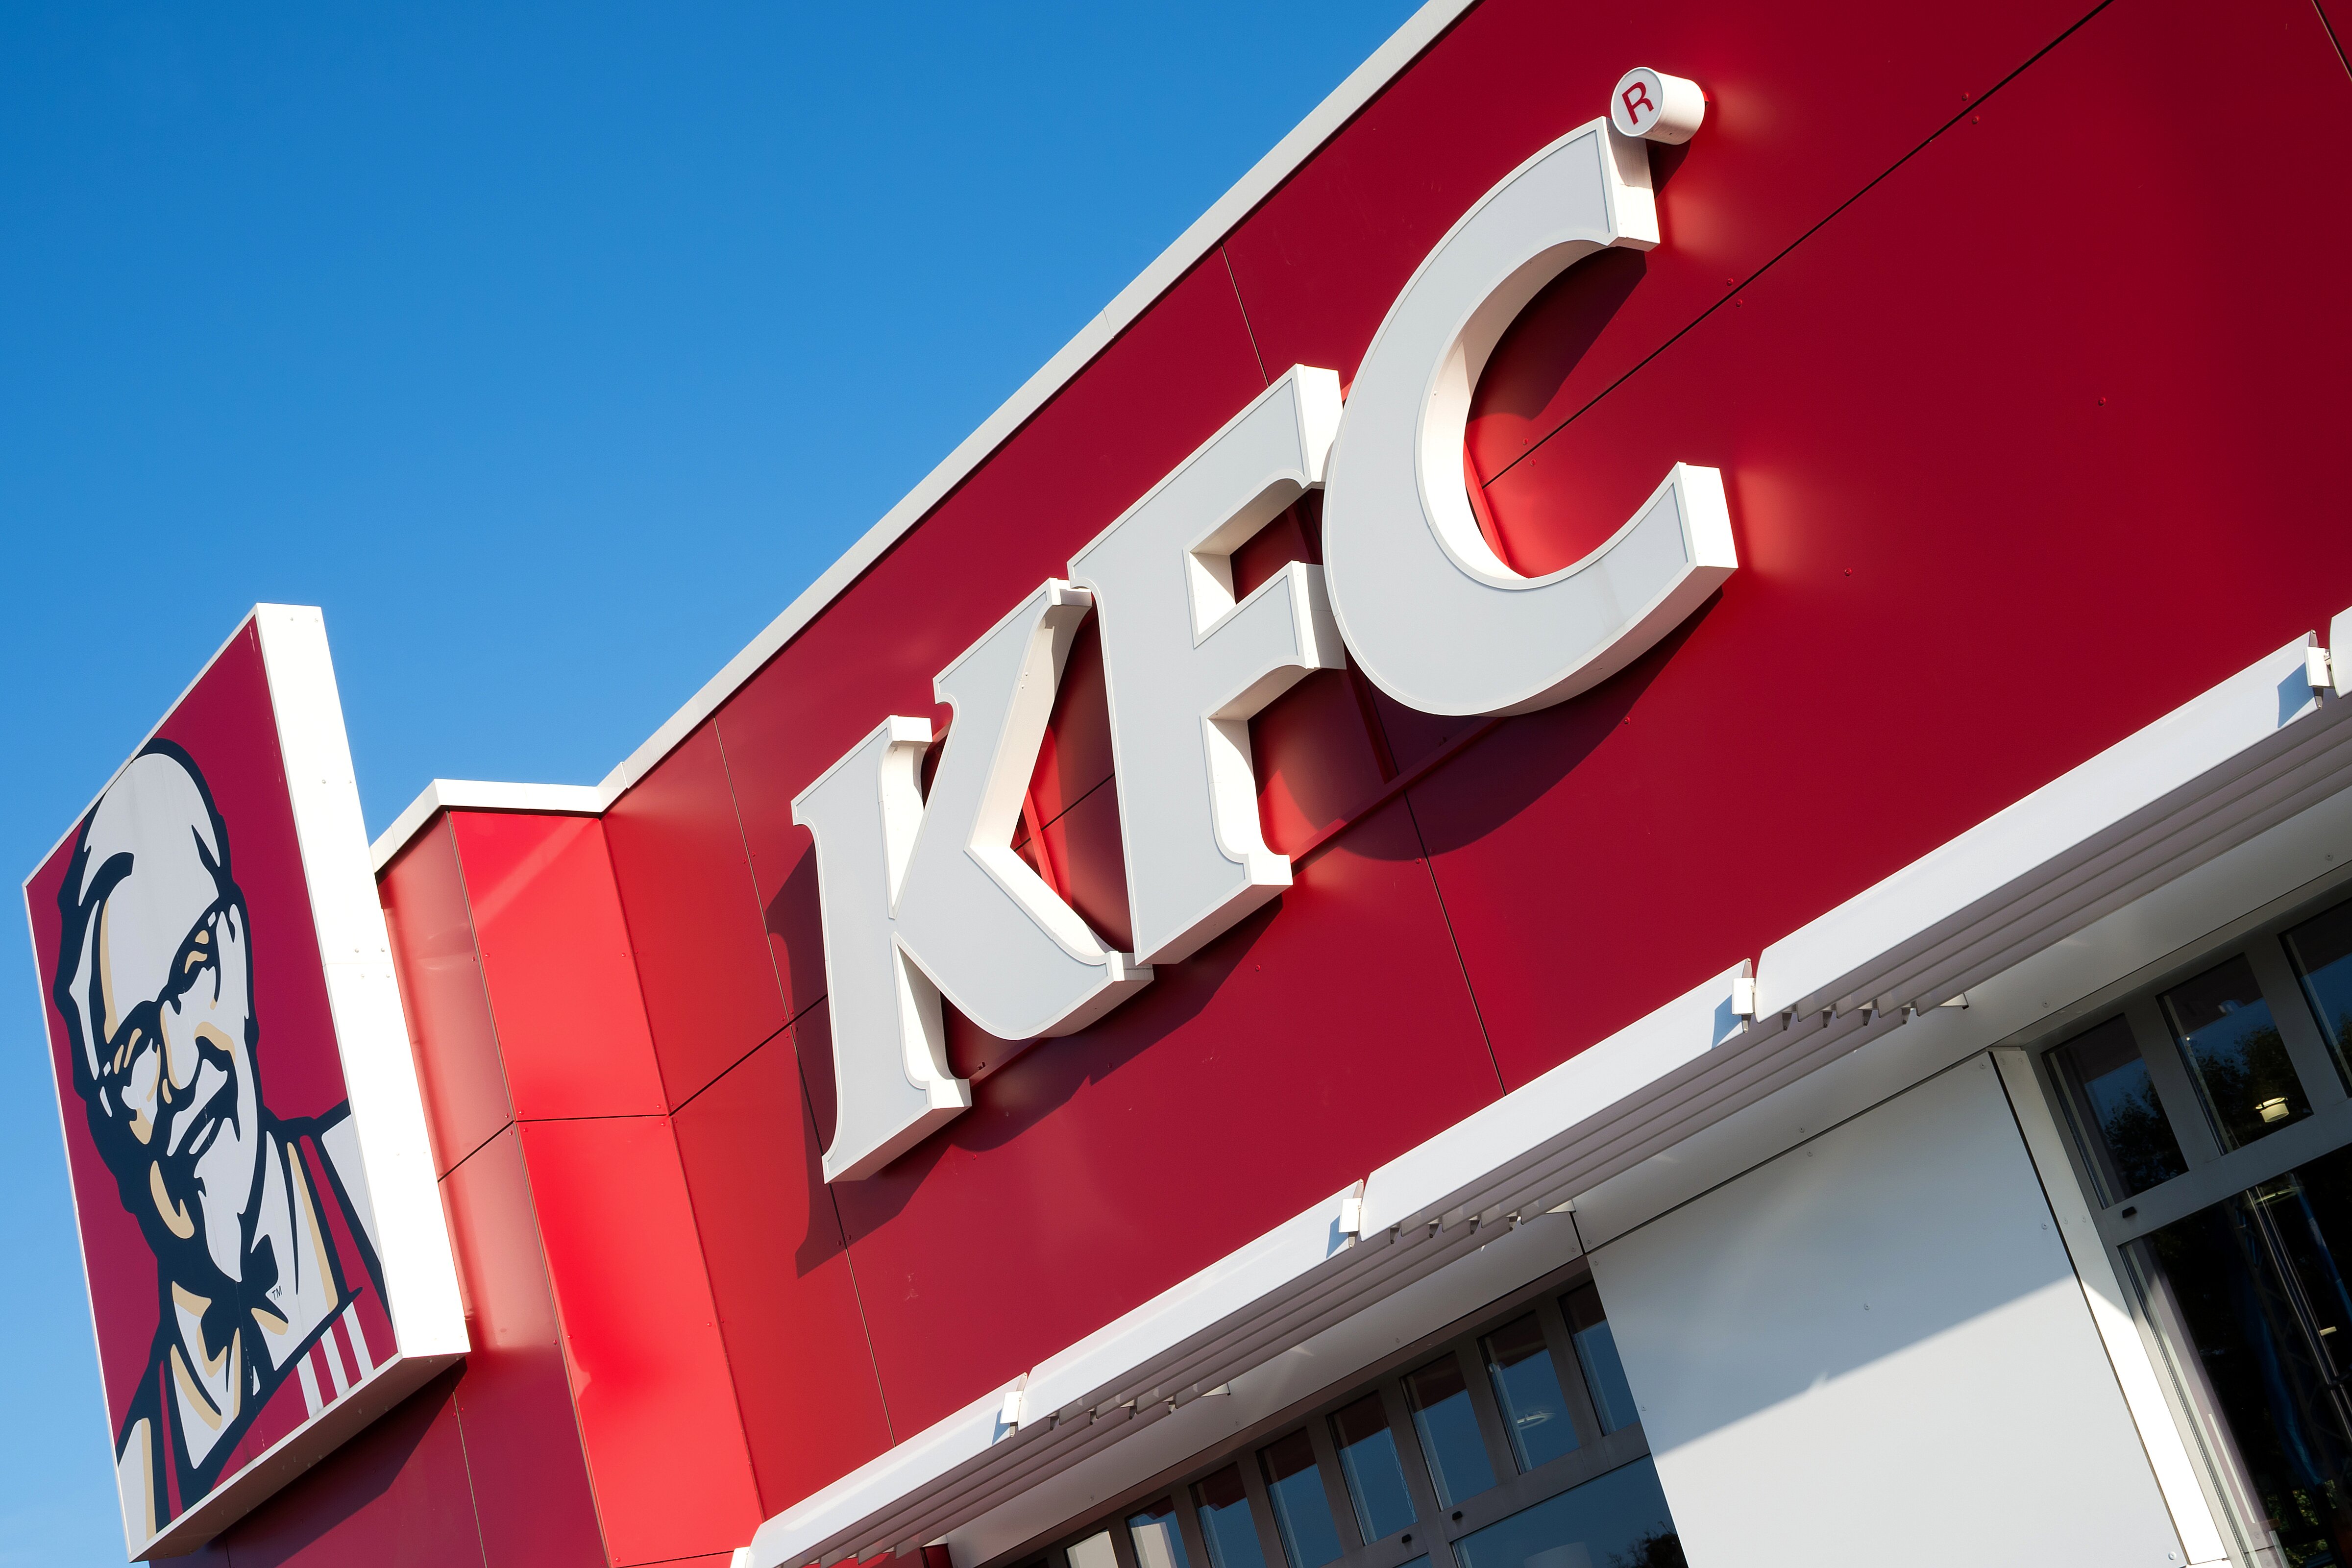 KFC warns some menu items may not be available due to disruption